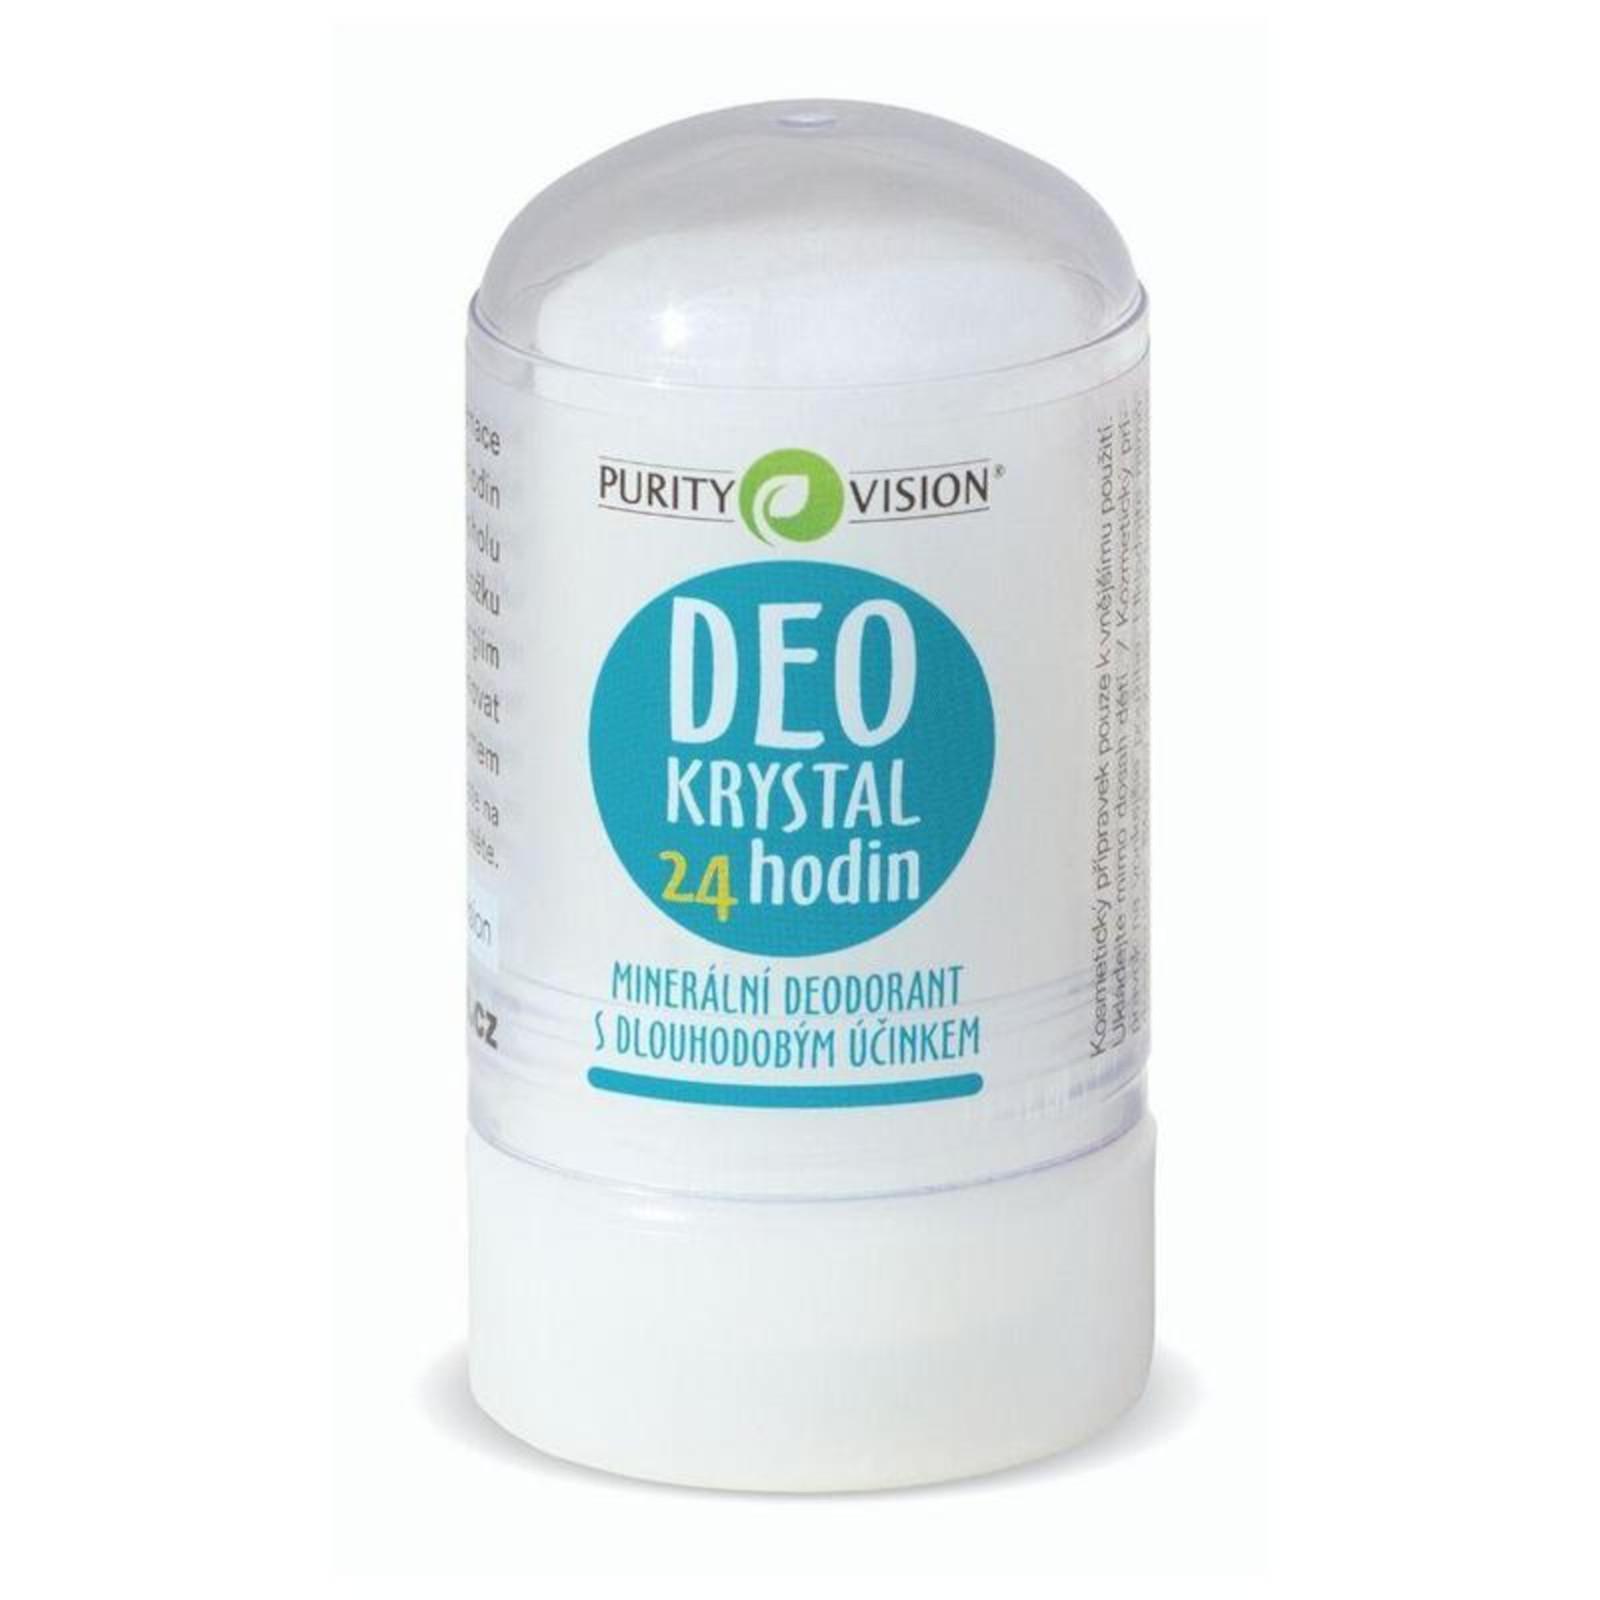 Purity Vision Deo krystal 24 hodin 60 g